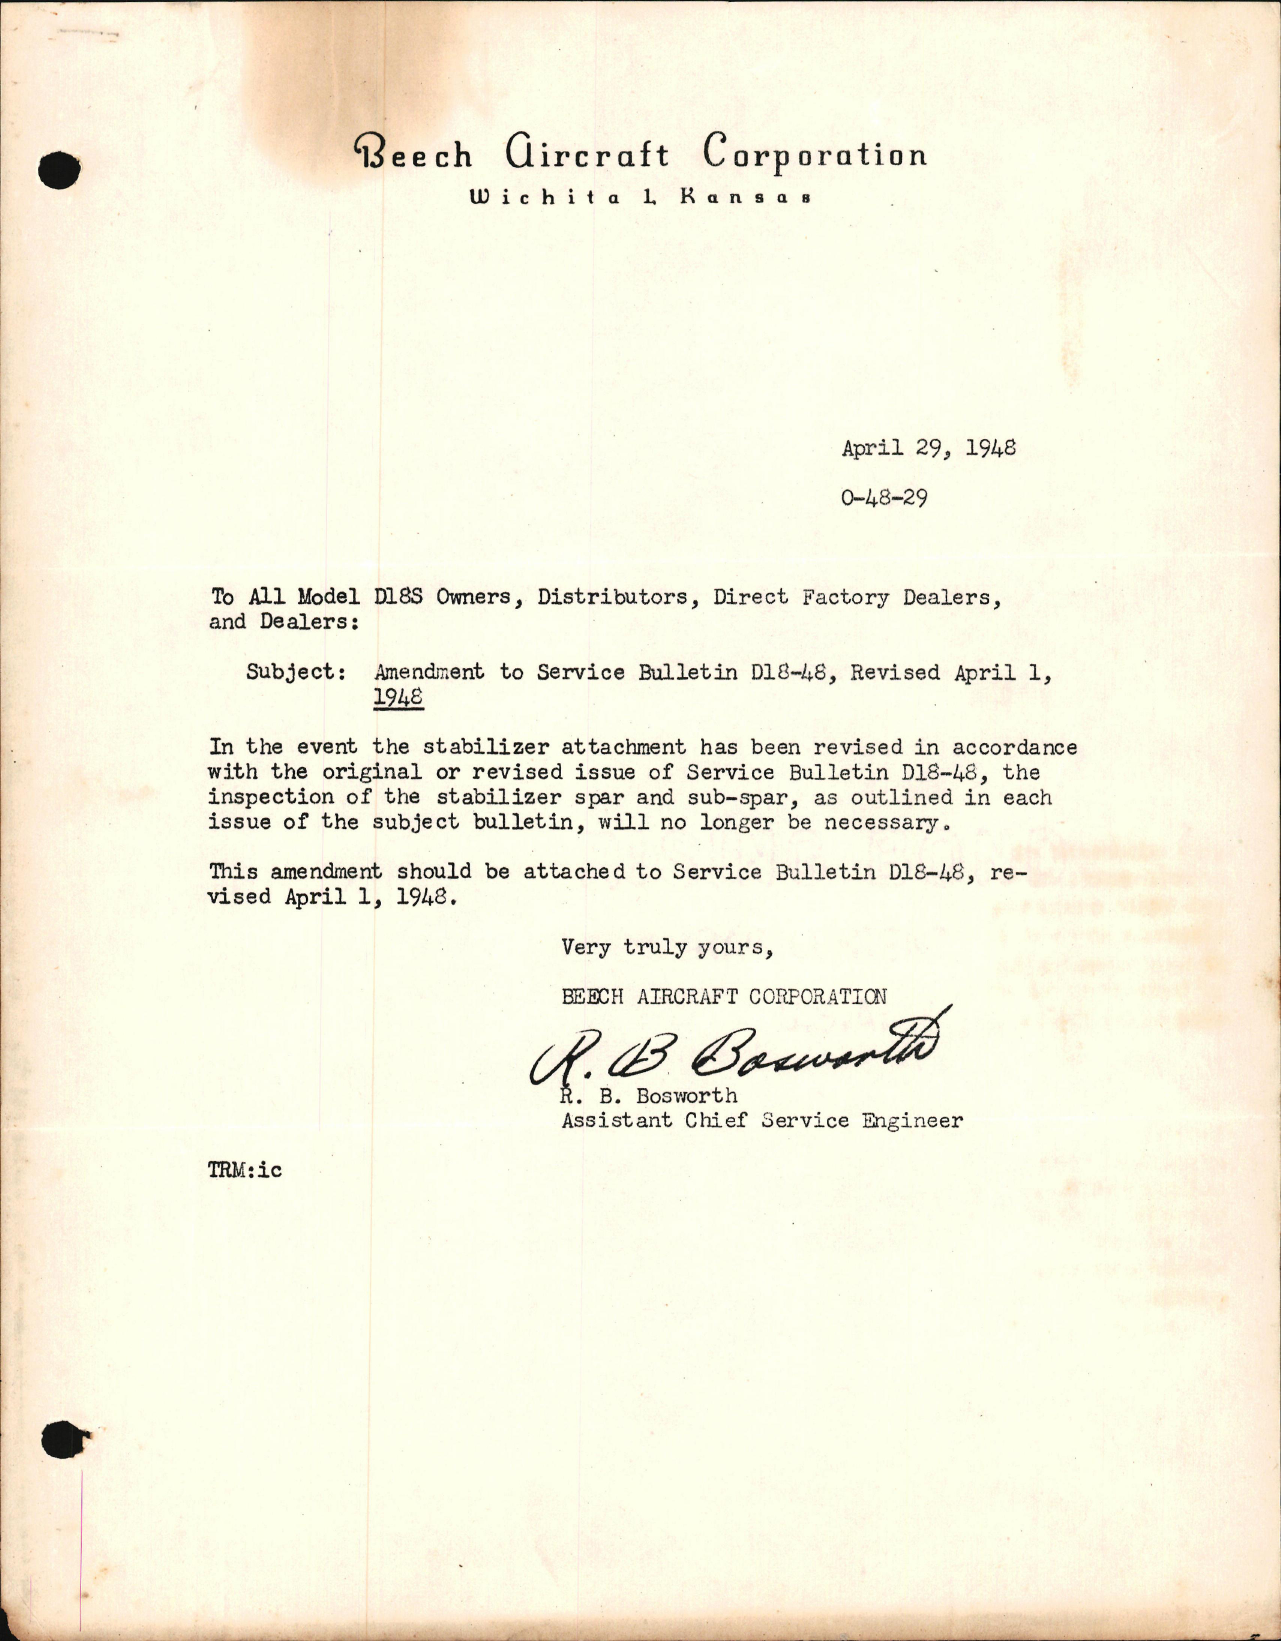 Sample page 1 from AirCorps Library document: Inspection of Stabilizer Spar and Revision of Stabilizer Attachment, Amendment Letter to Bulletin D18-48